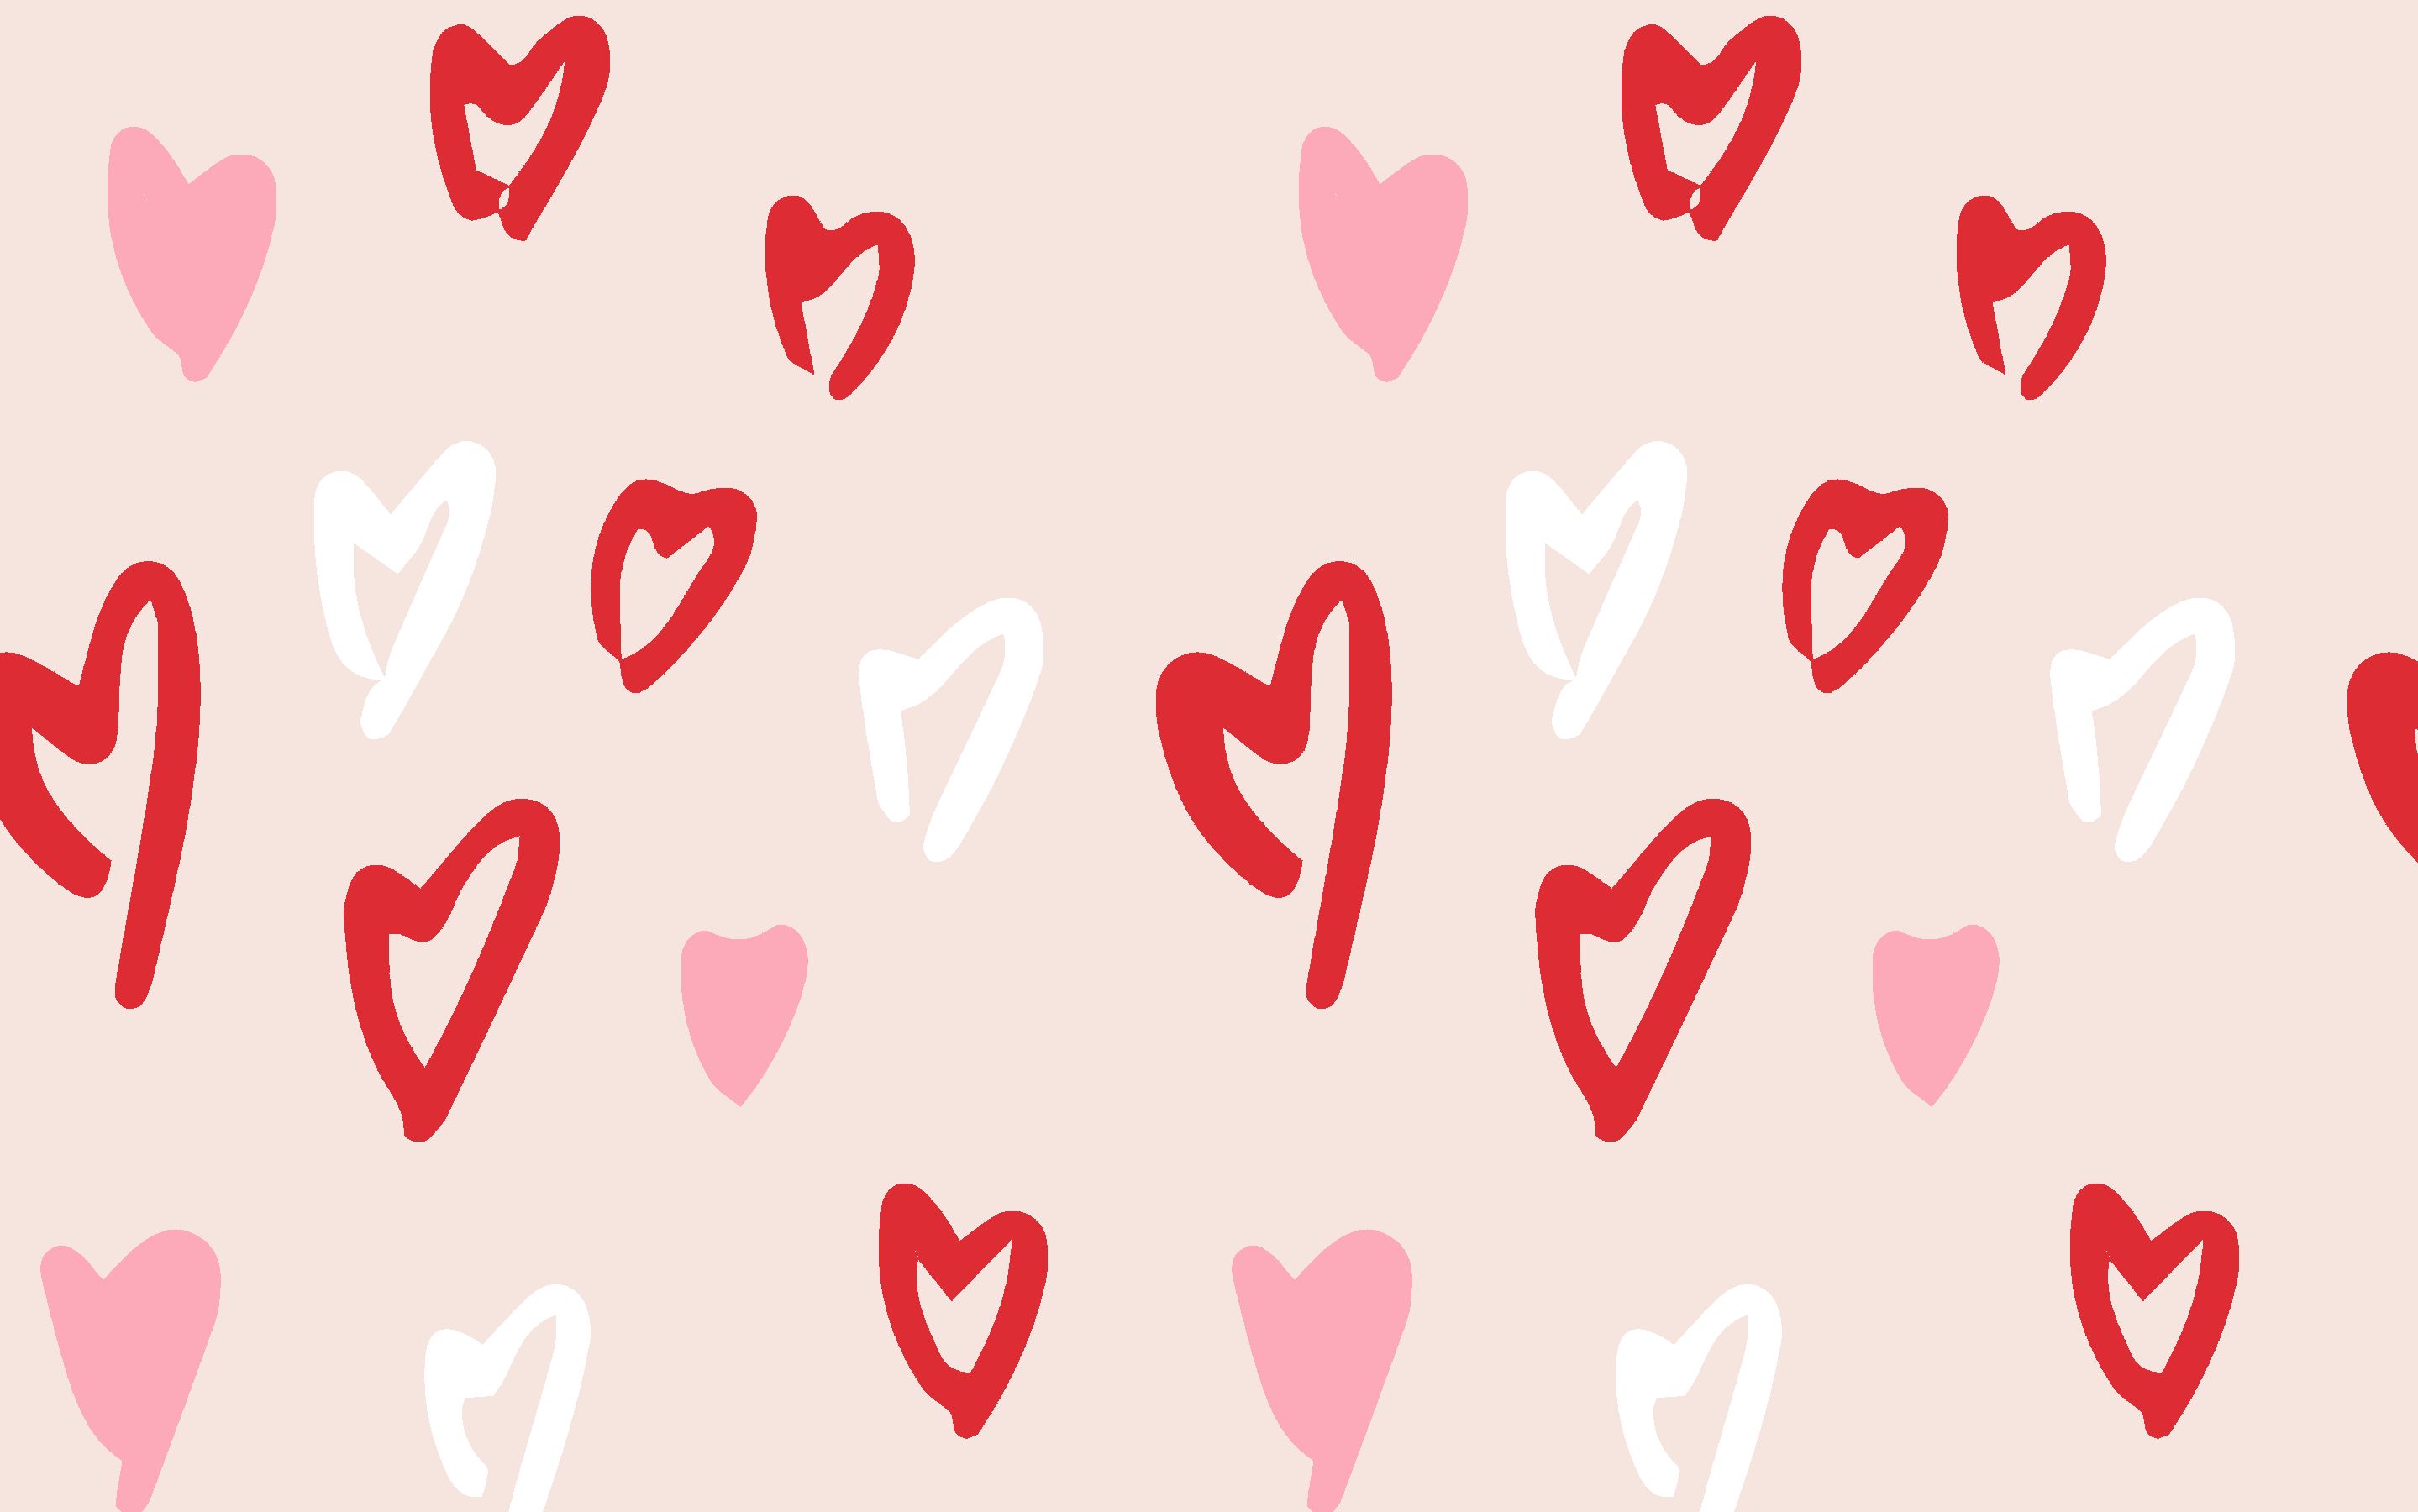 Free valentine's day heart wallpaper for your desktop or phone. Valentines day background, Heart wallpaper, Valentines day hearts